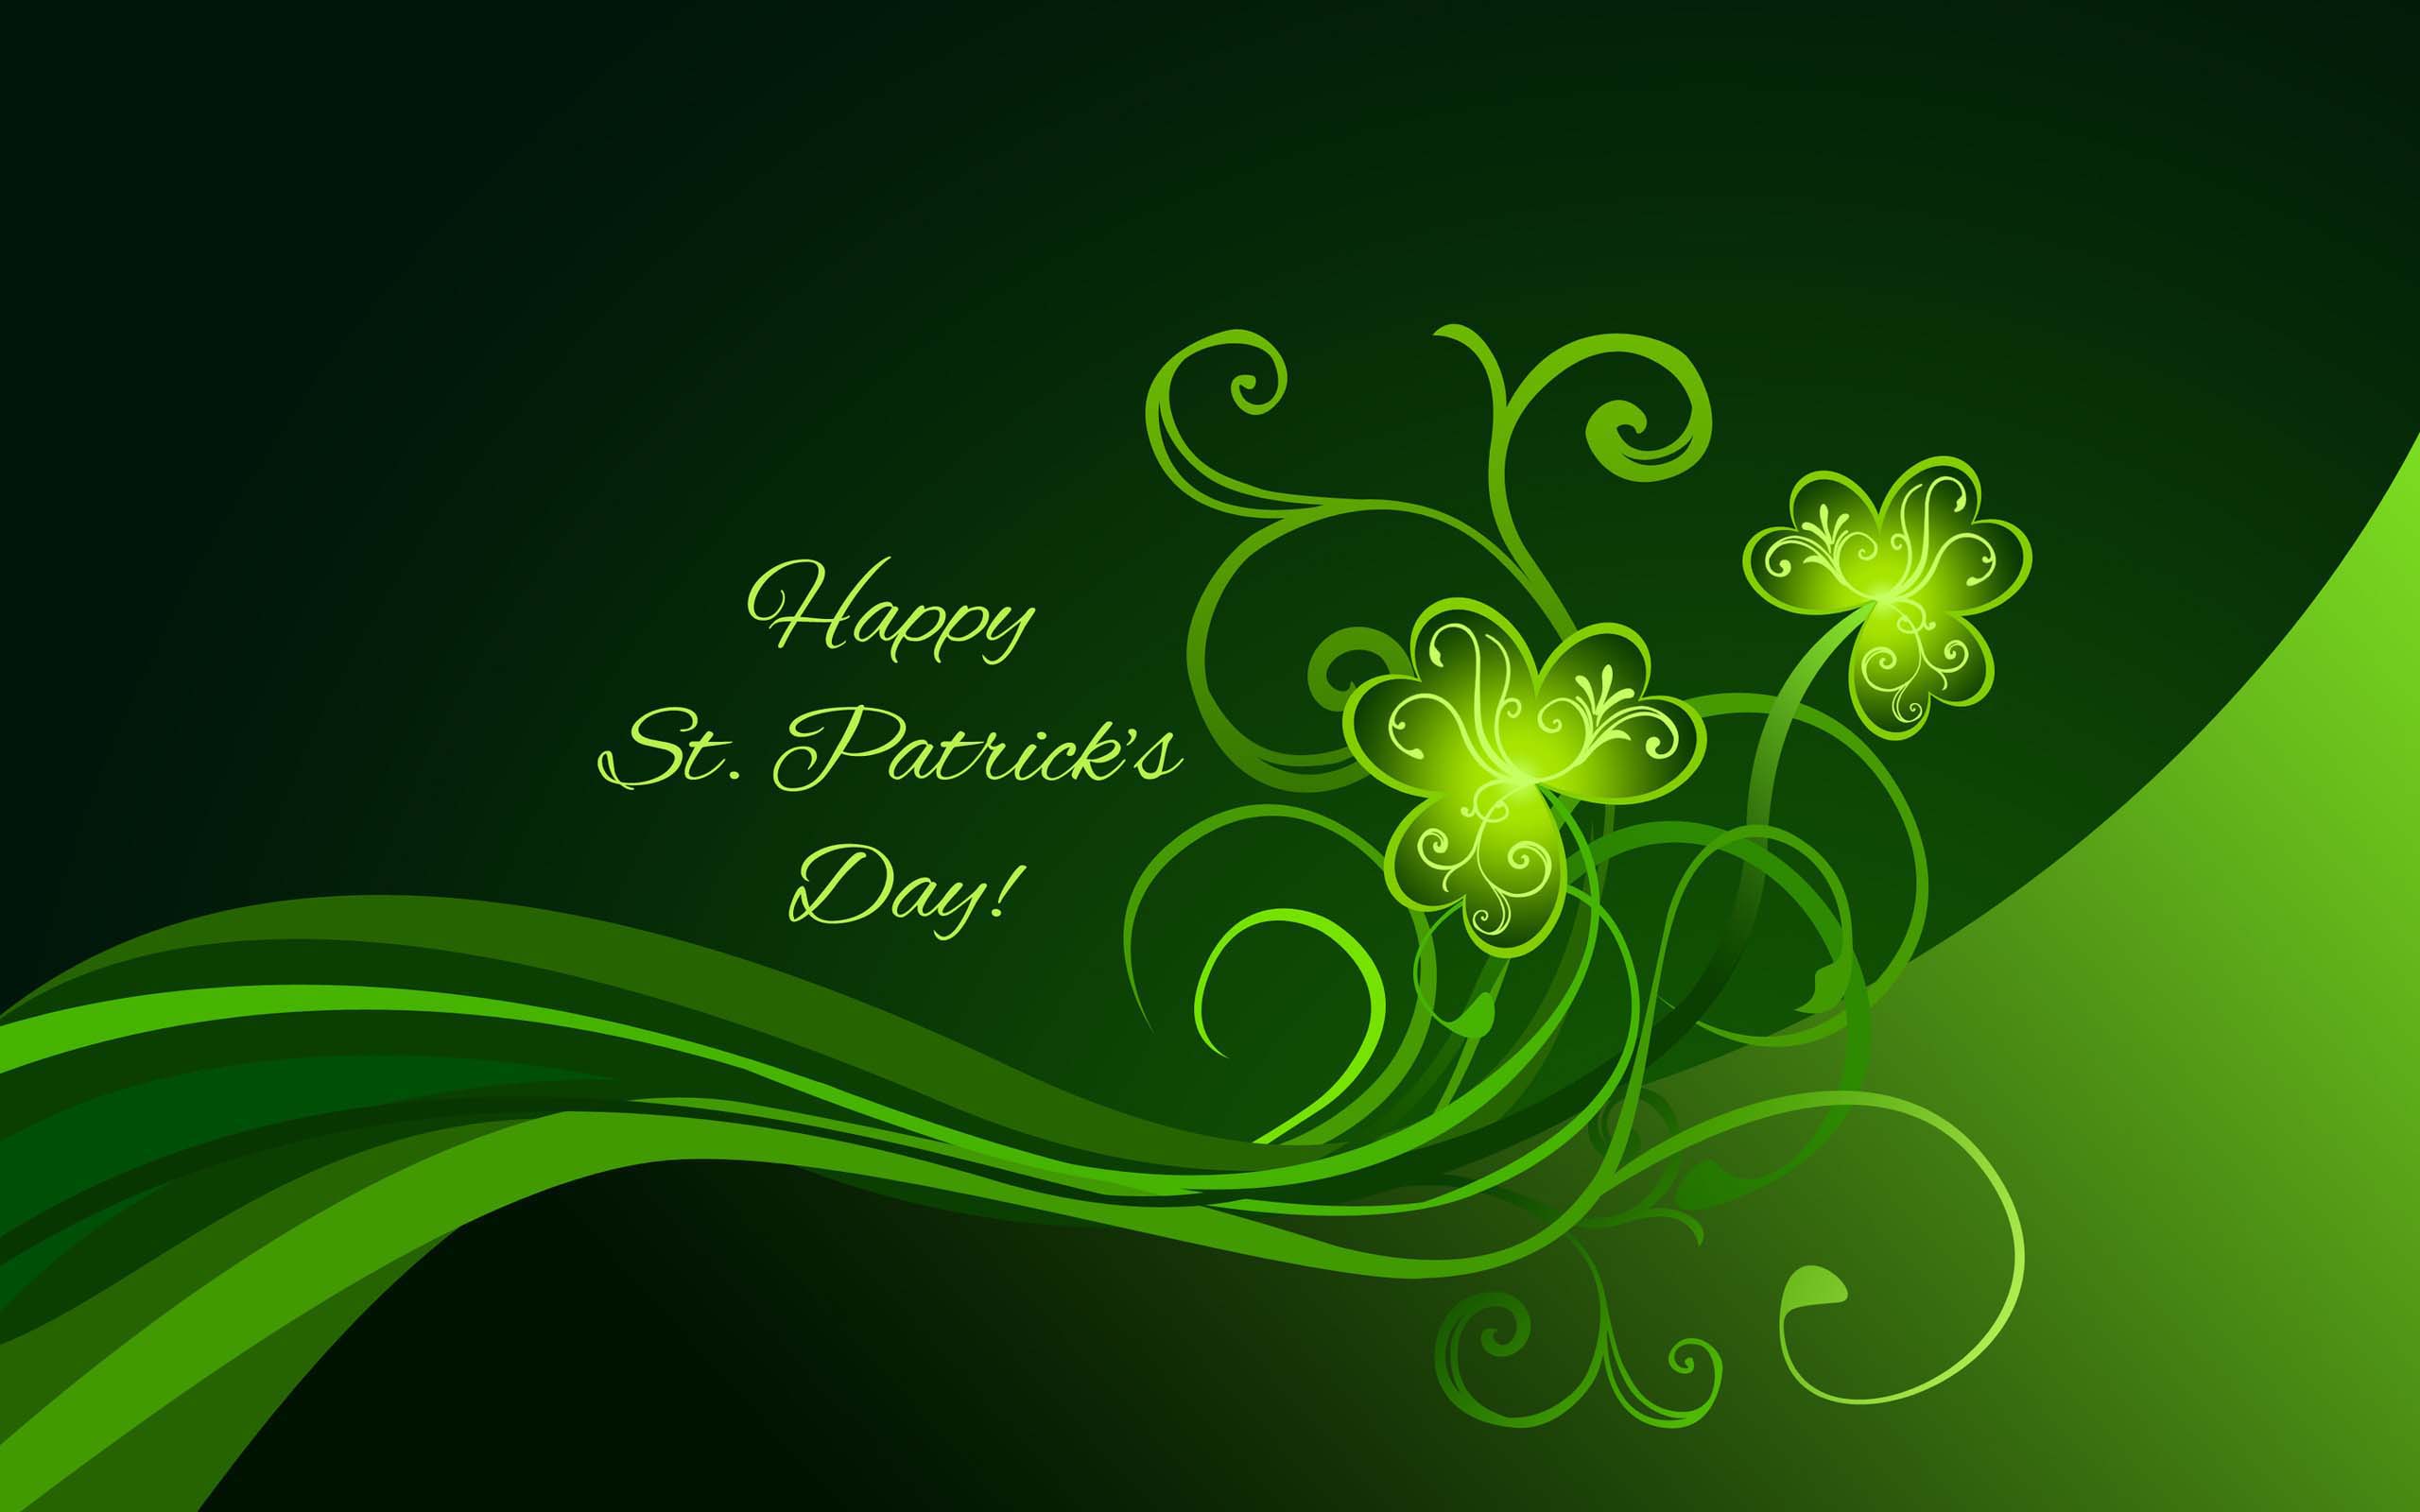 Happy St. Patricks Day 2016 Pictures Wallpaper - USA Festival